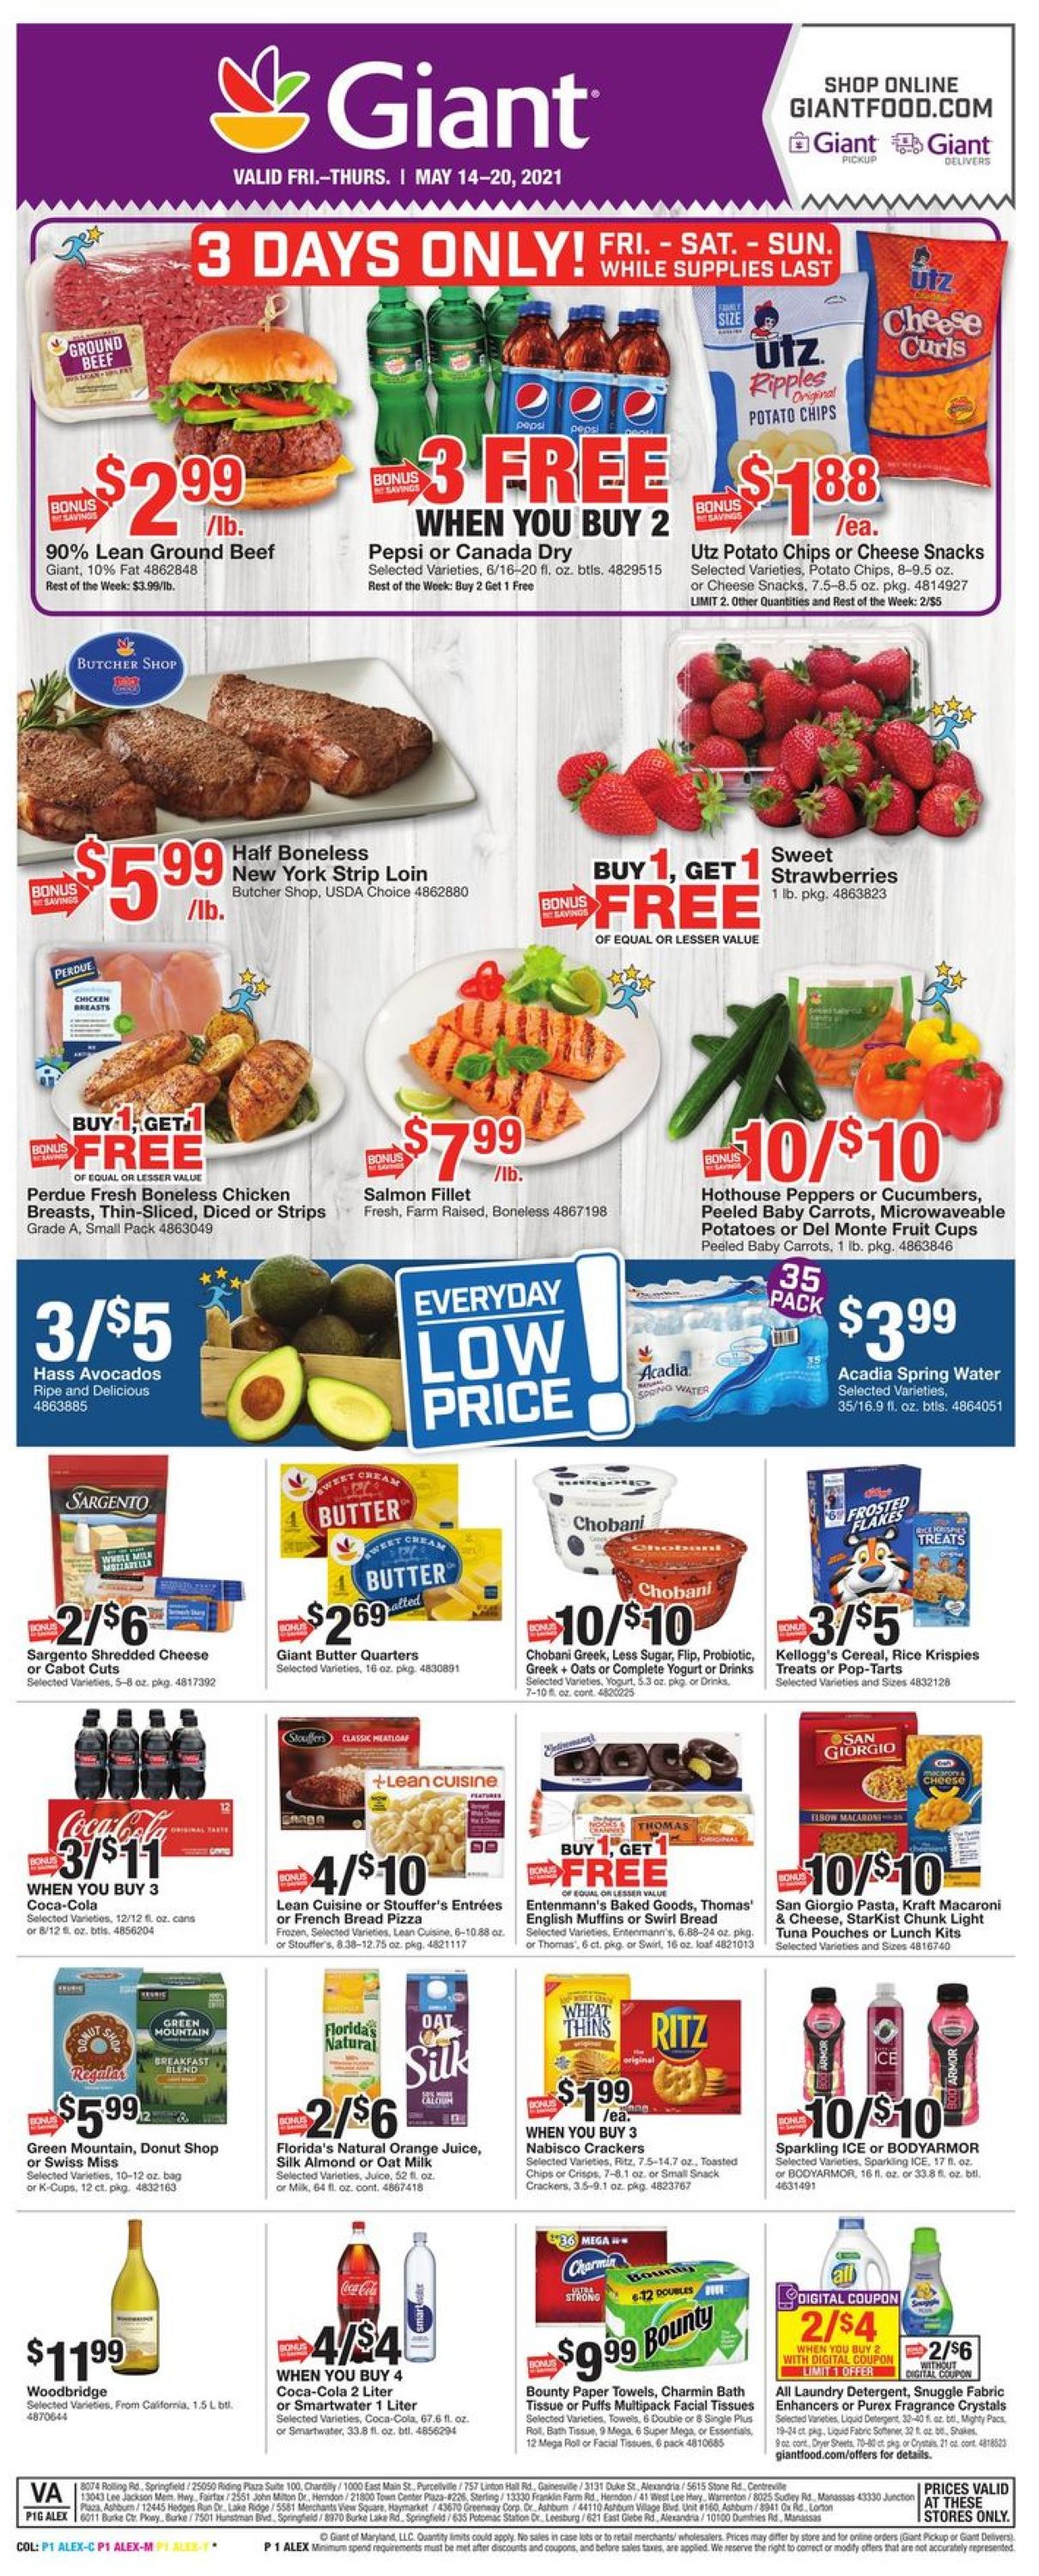 Giant Food Current weekly ad 05/14 - 05/20/2021 - frequent-ads.com